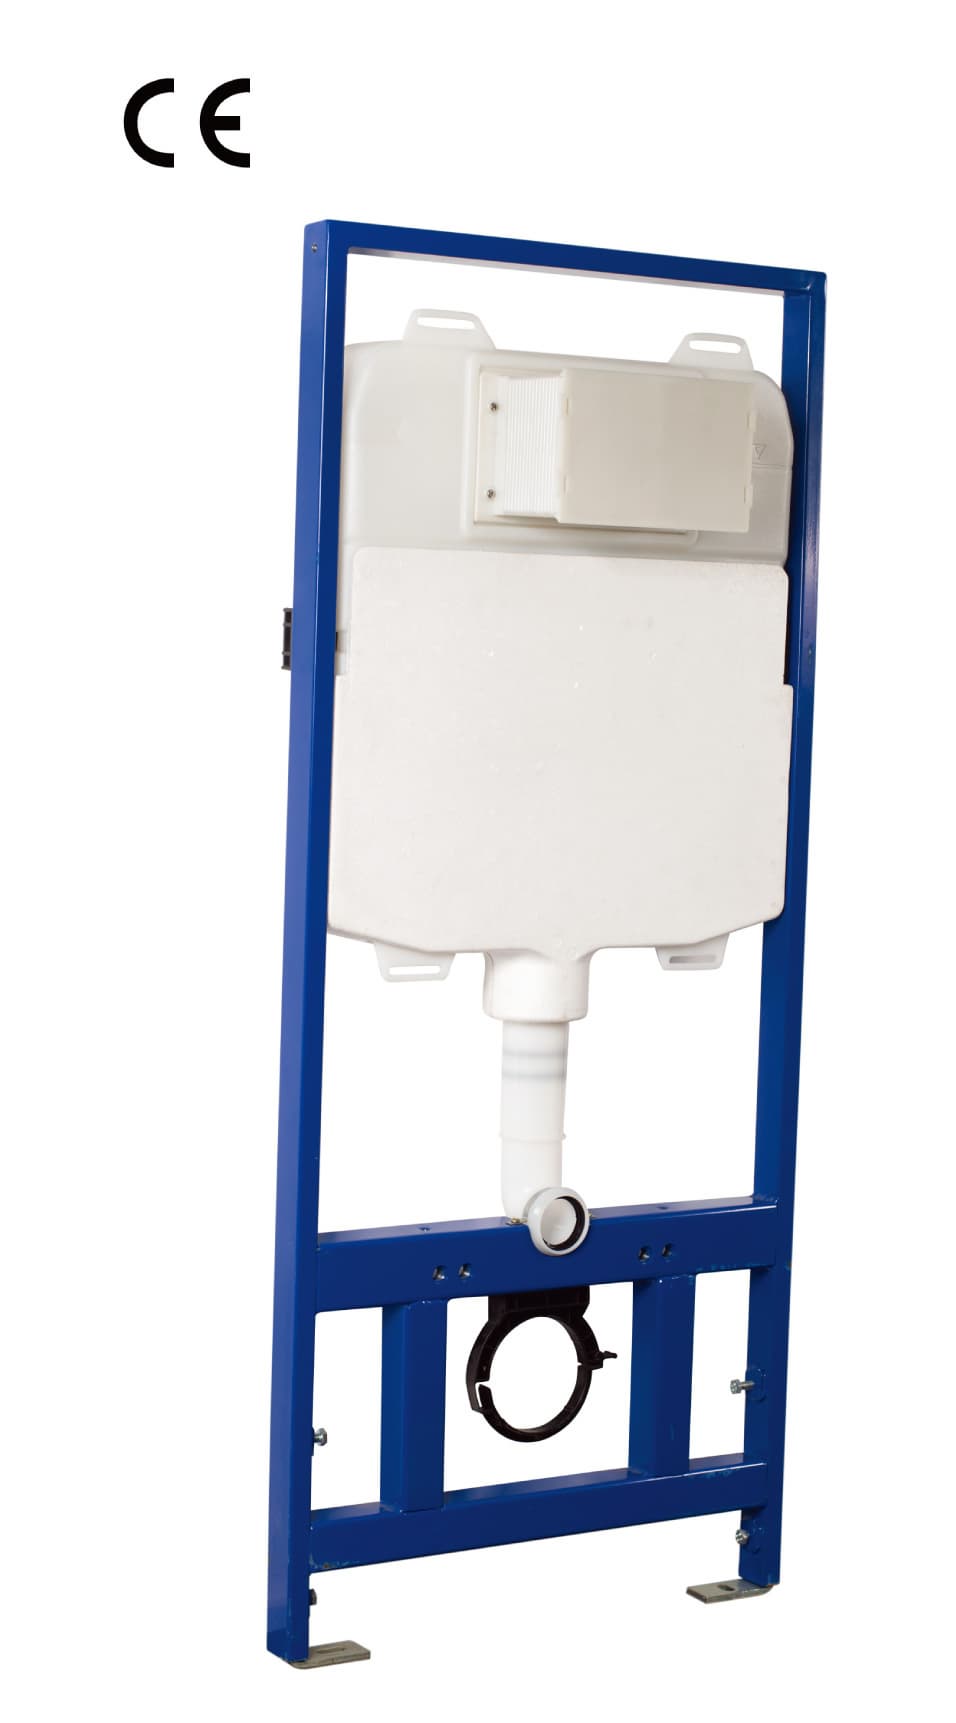 CE certified pneumatic concealed flushing cistern for wall hung WC